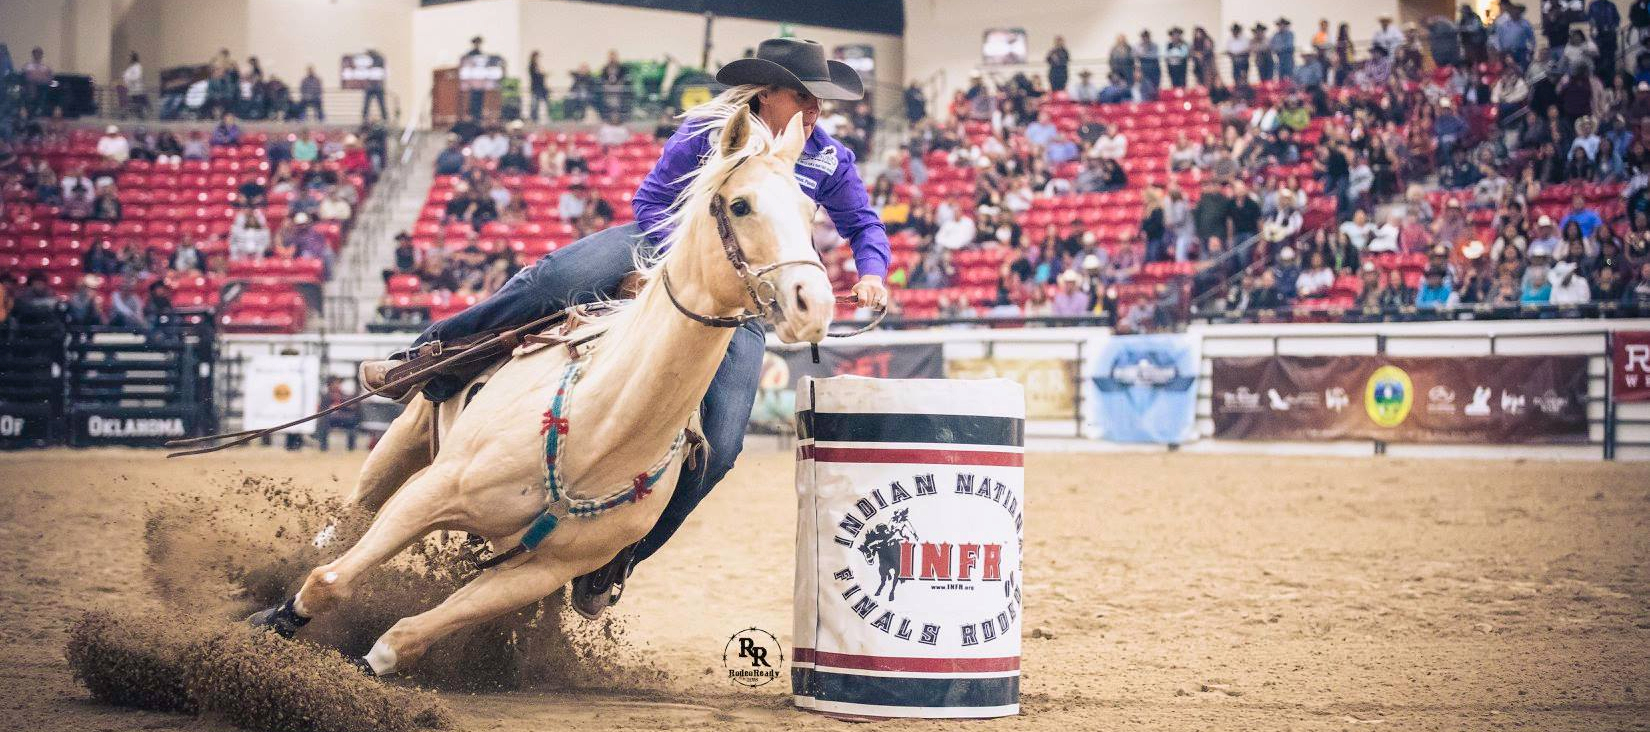 Indian National Finals Rodeo (INFR) To Be Televised on Ride TV in October